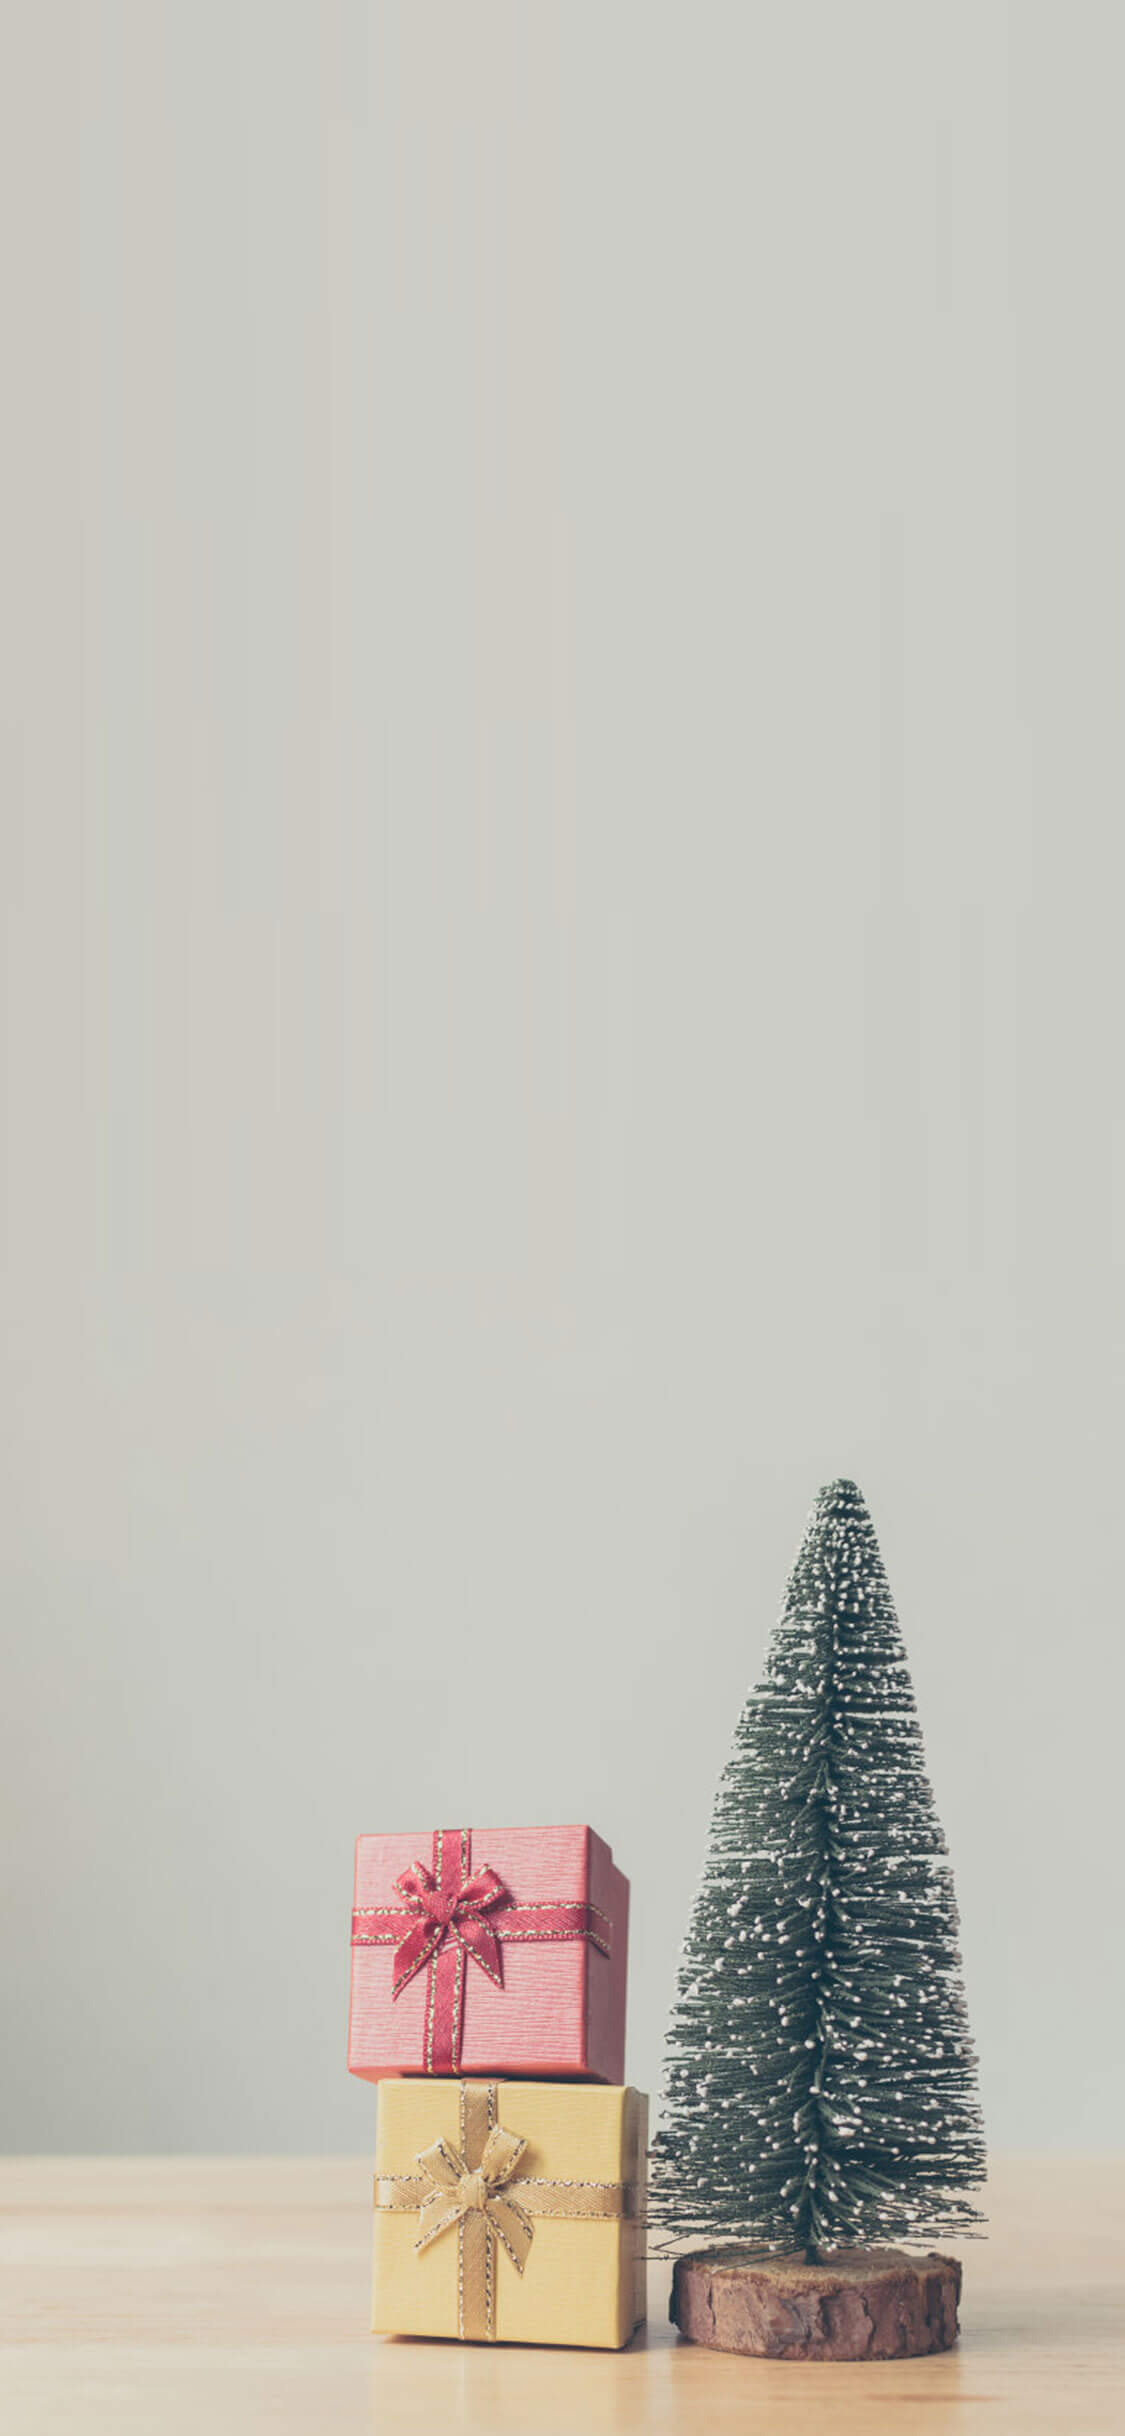 Christmas Tree Iphone Wallpapers